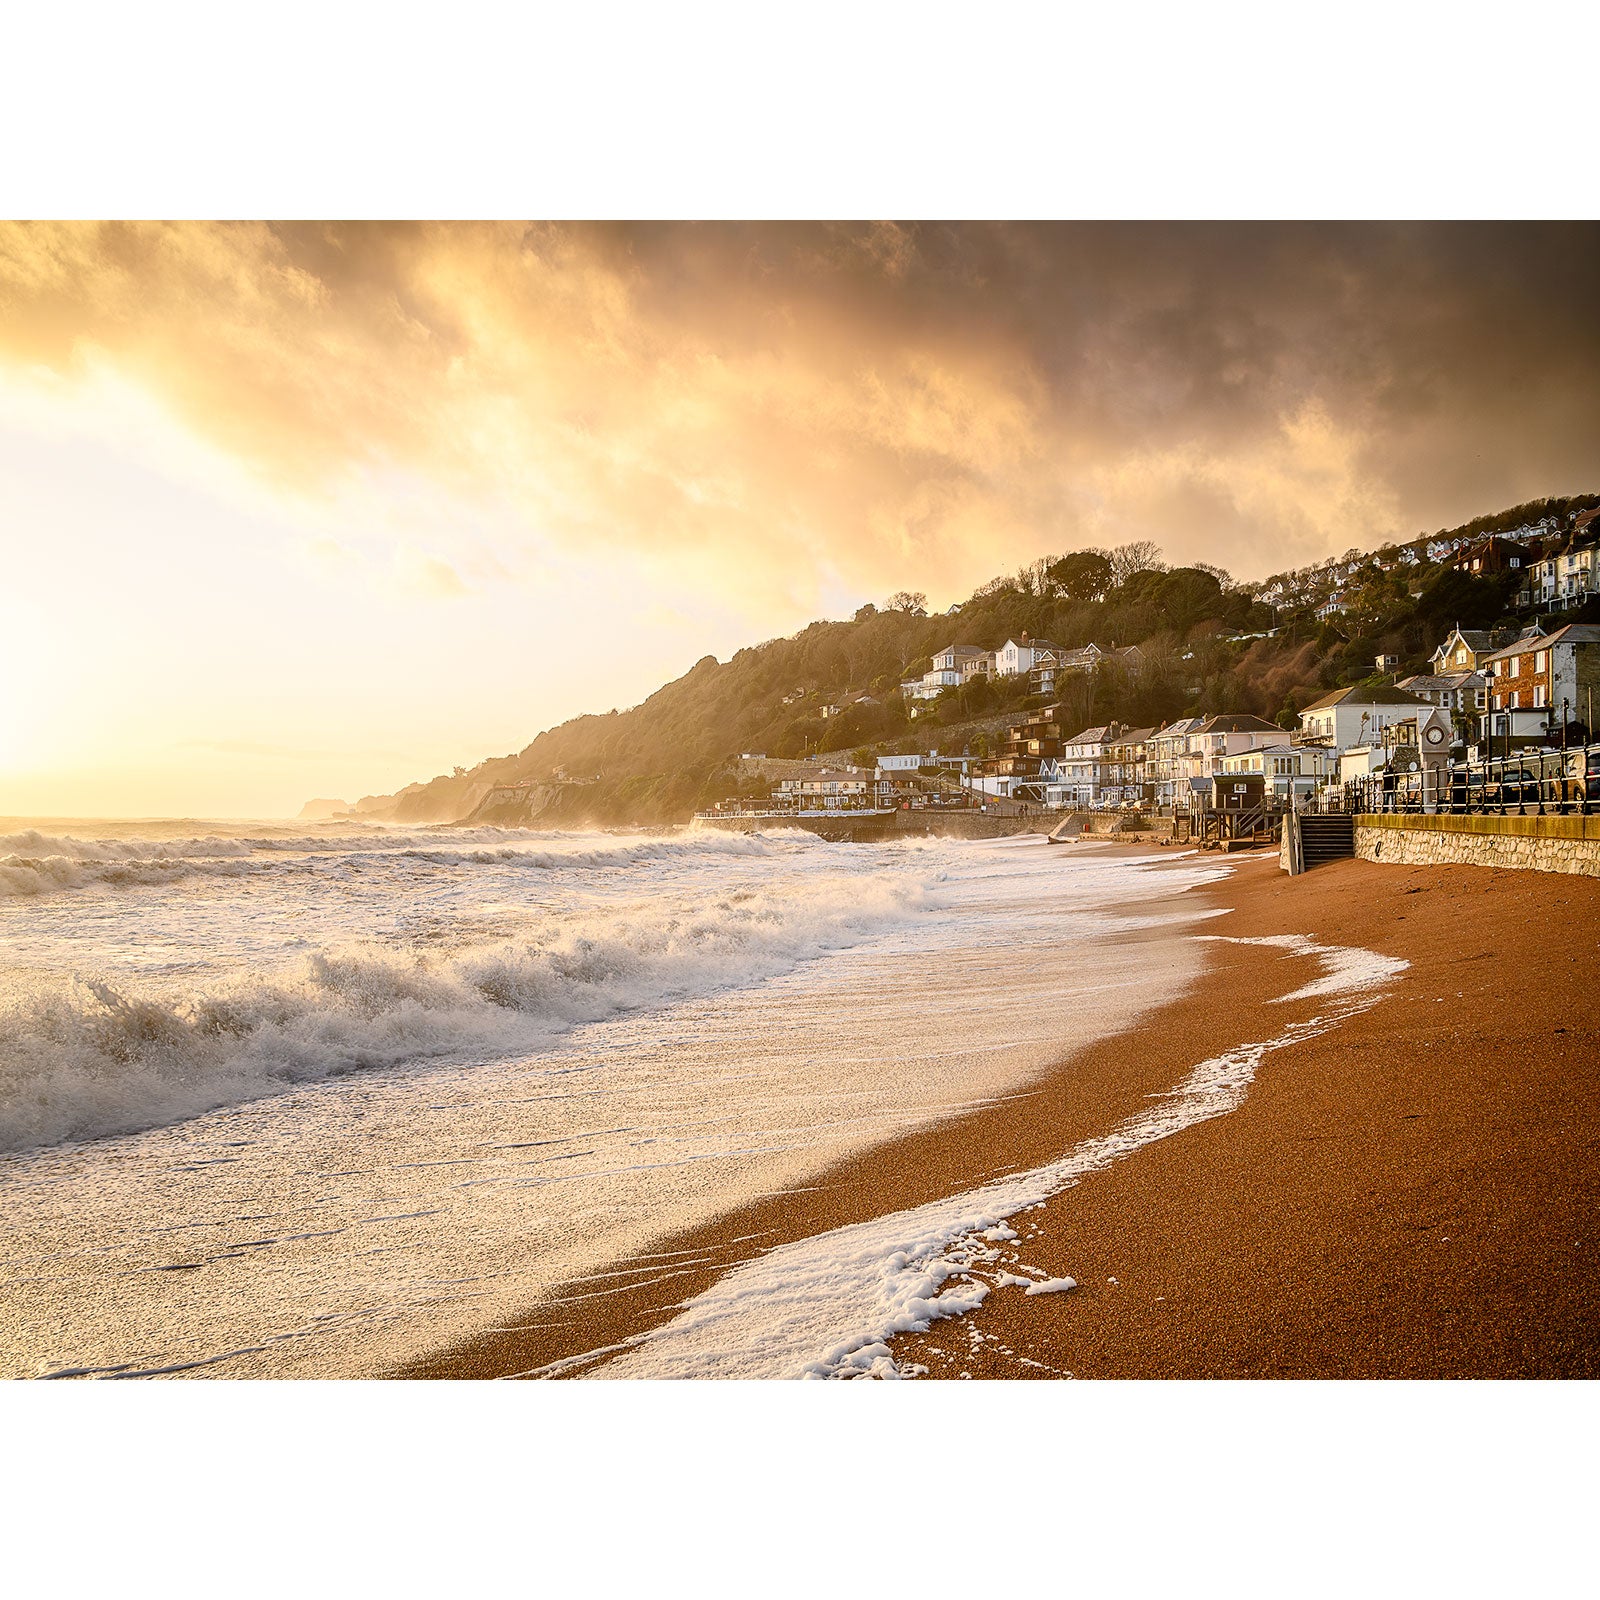 Seaside town at sunset on the Isle of Wight with waves crashing onto a sandy beach. - Ventnor by Available Light Photography